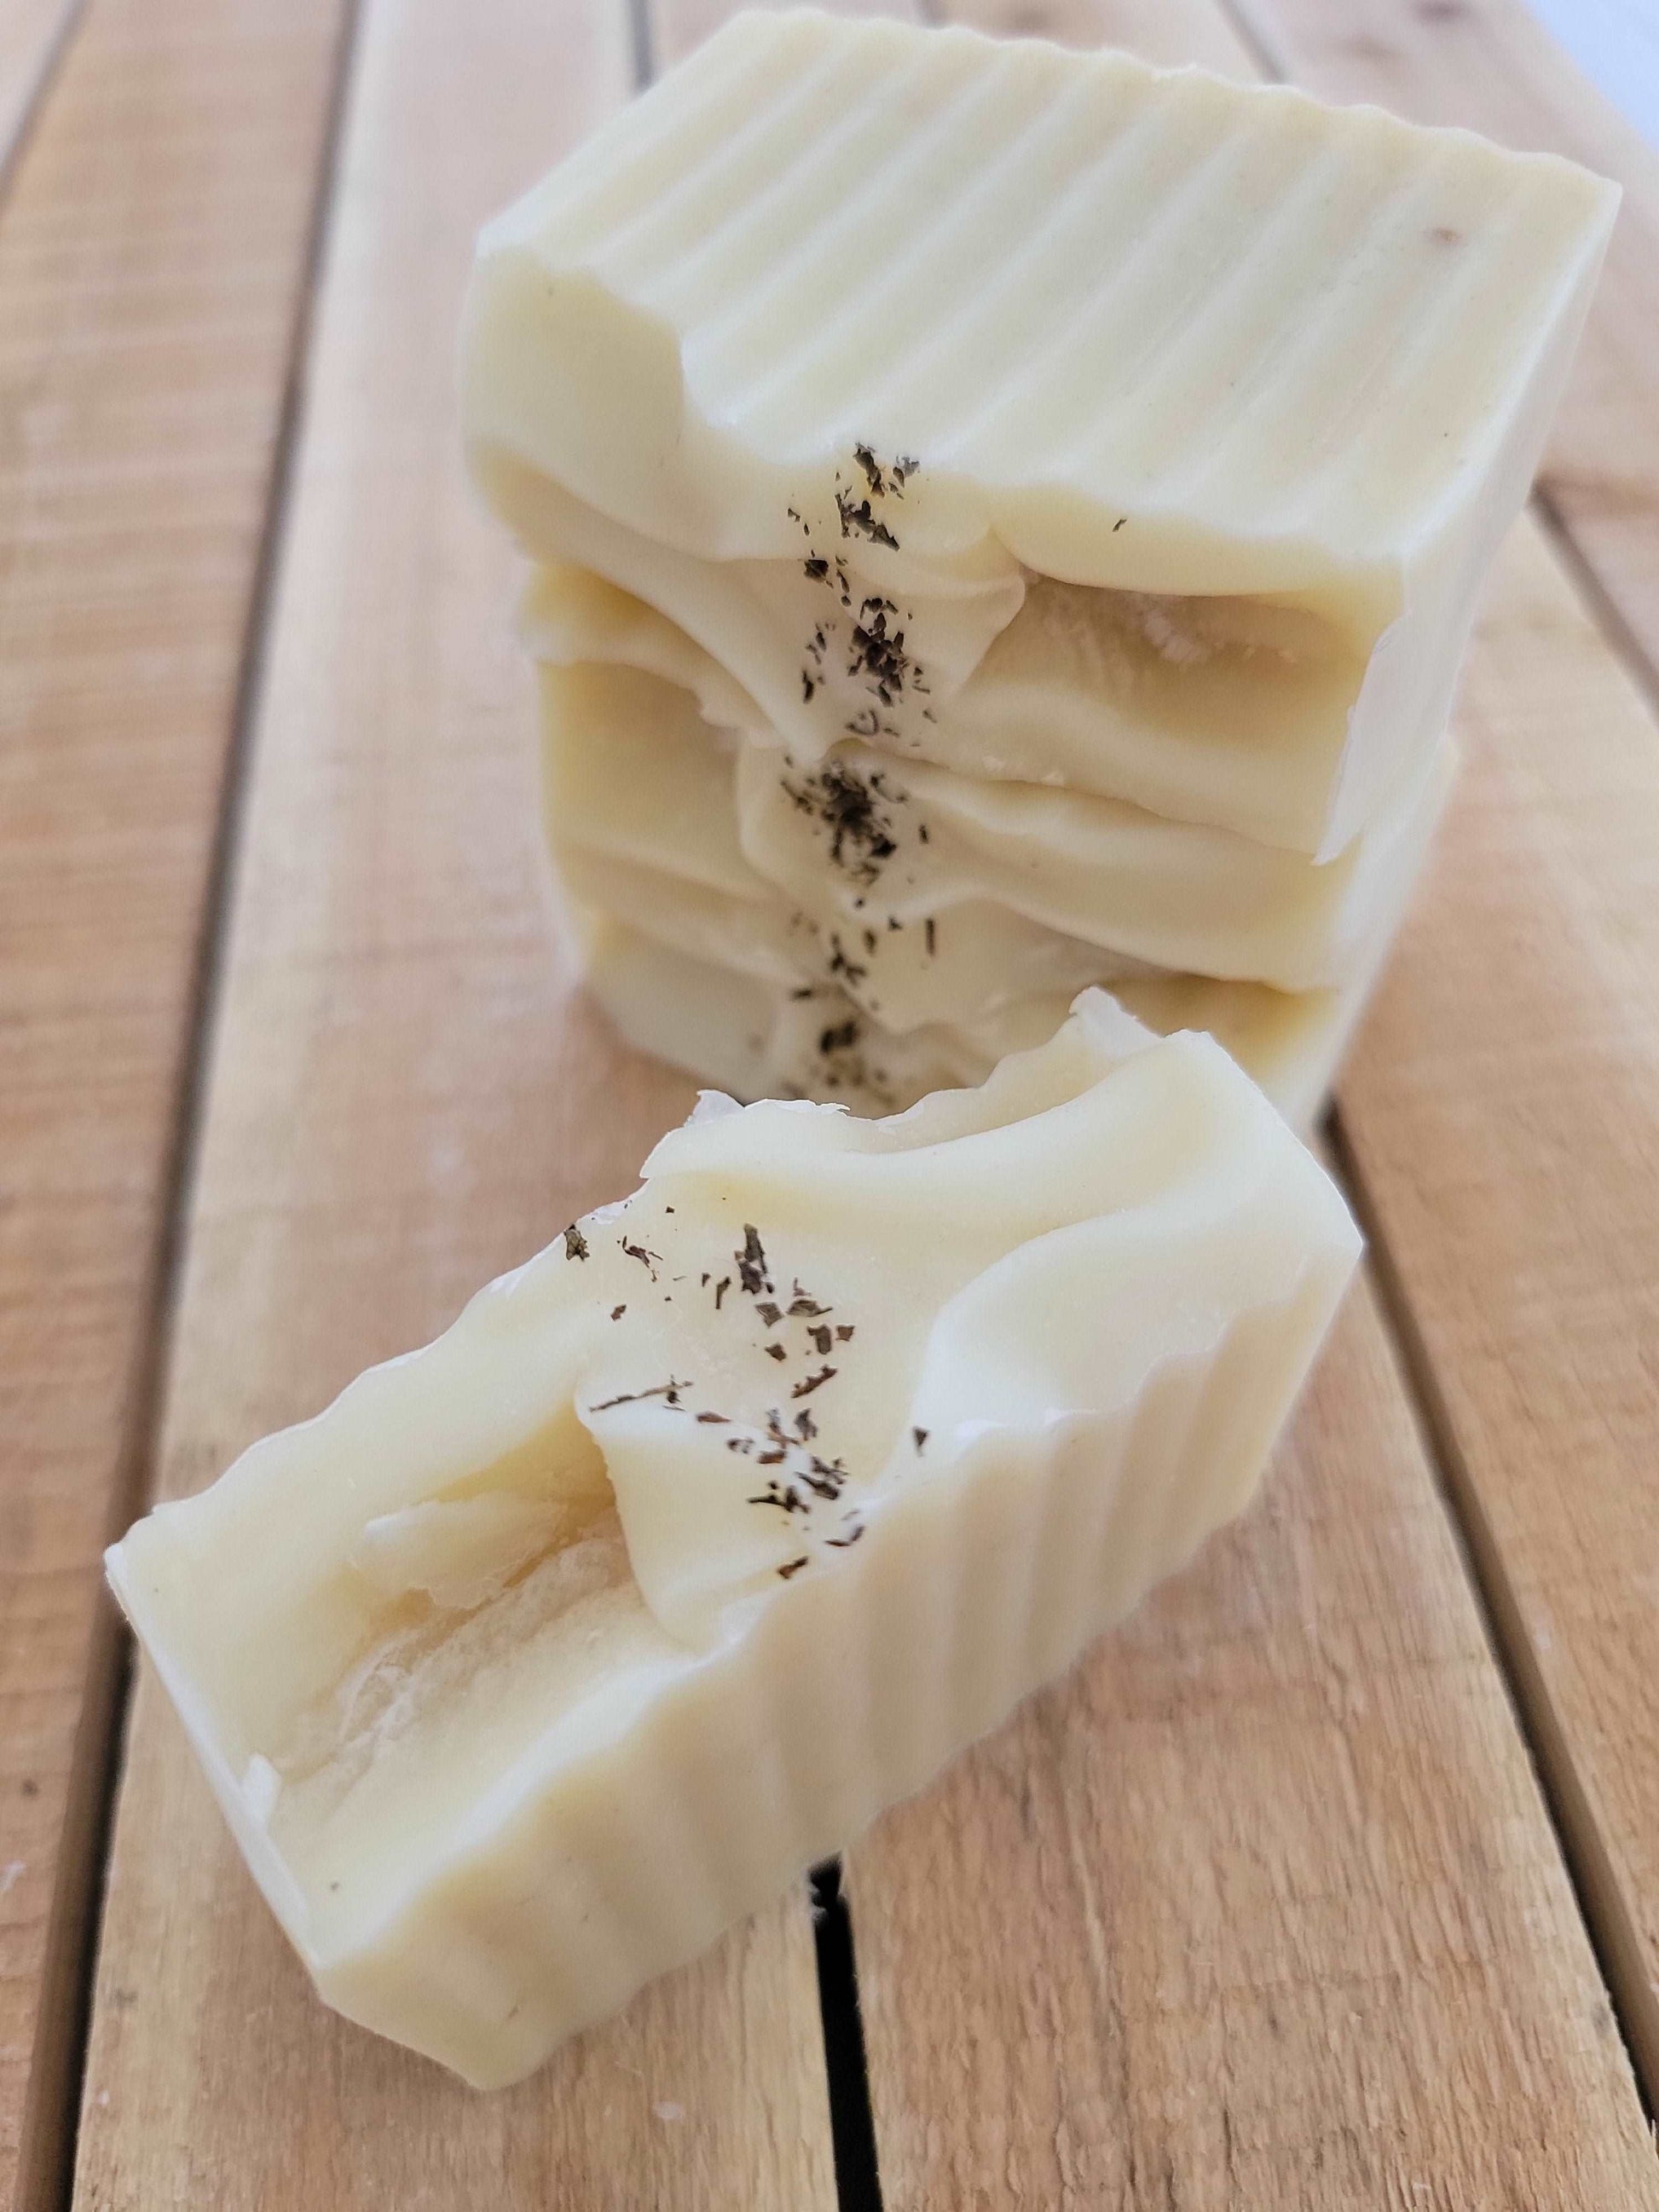 Basil and Mint Soap | Handmade and Natural | Sunflower Soaps